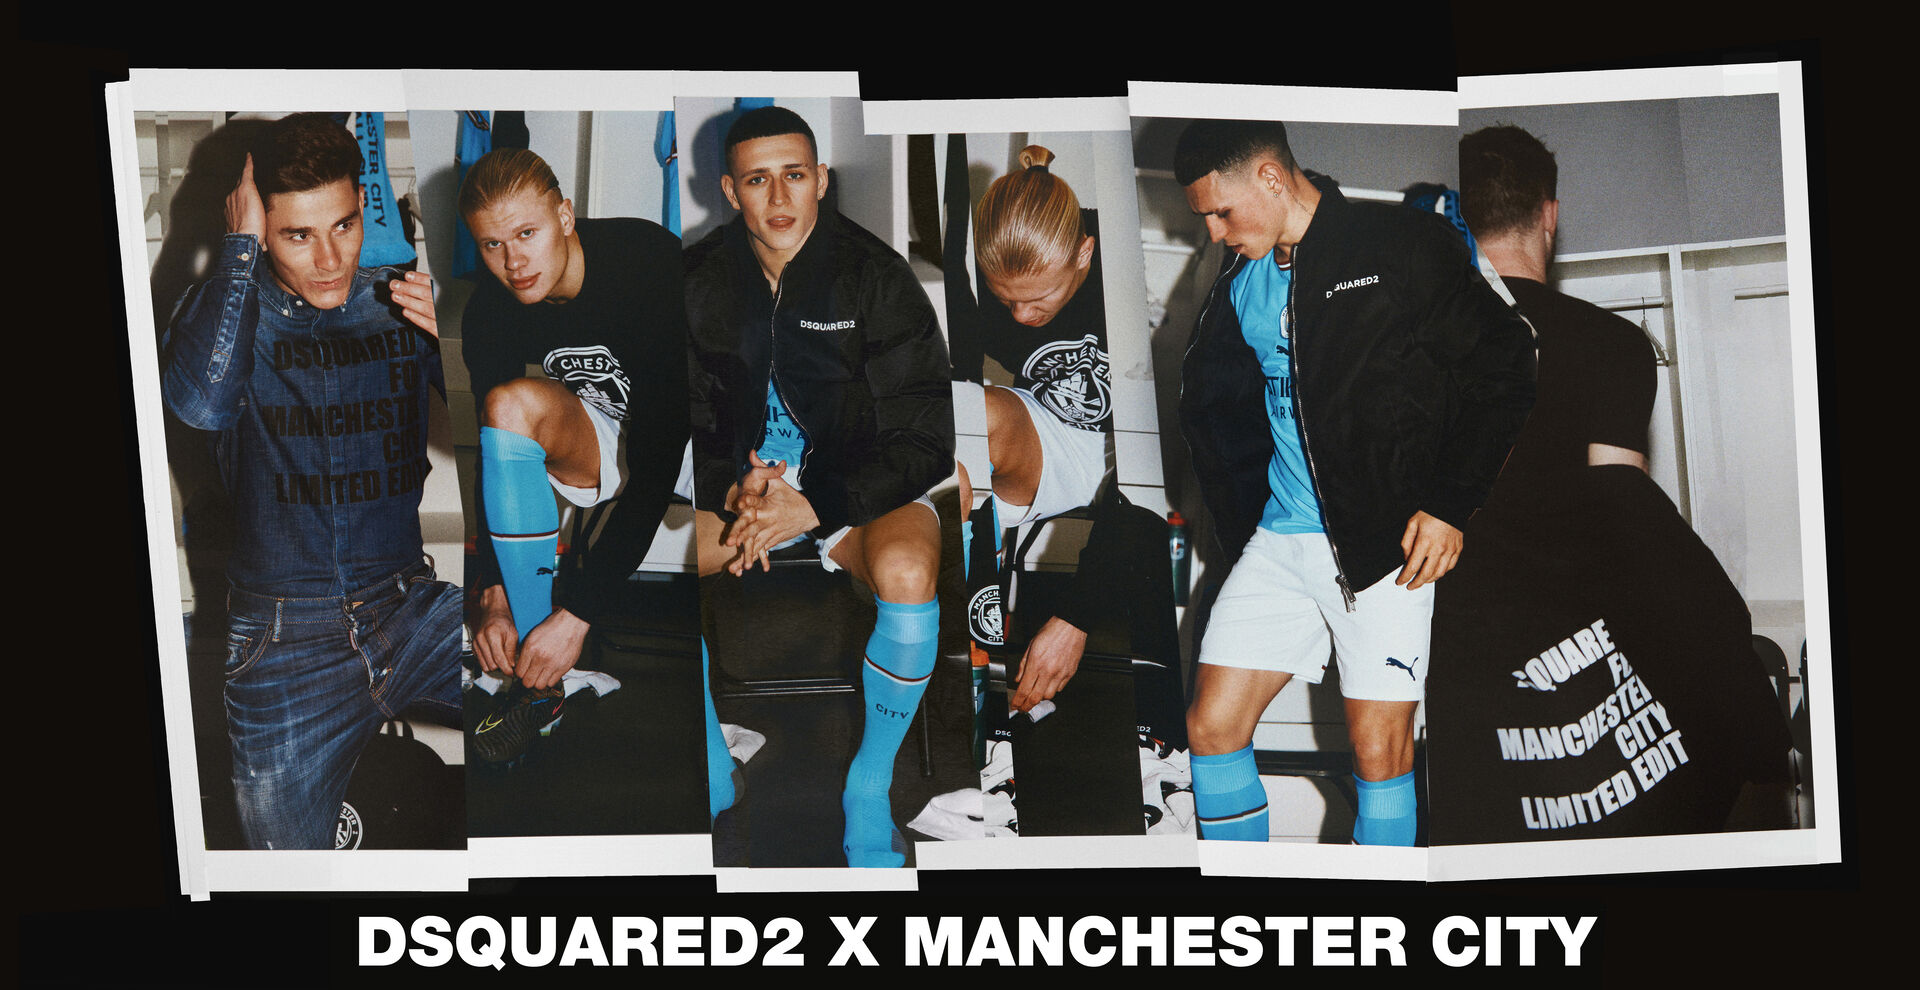 manchester city players in the locker room wearing the new dsquared2 x manchester city capsule collection.